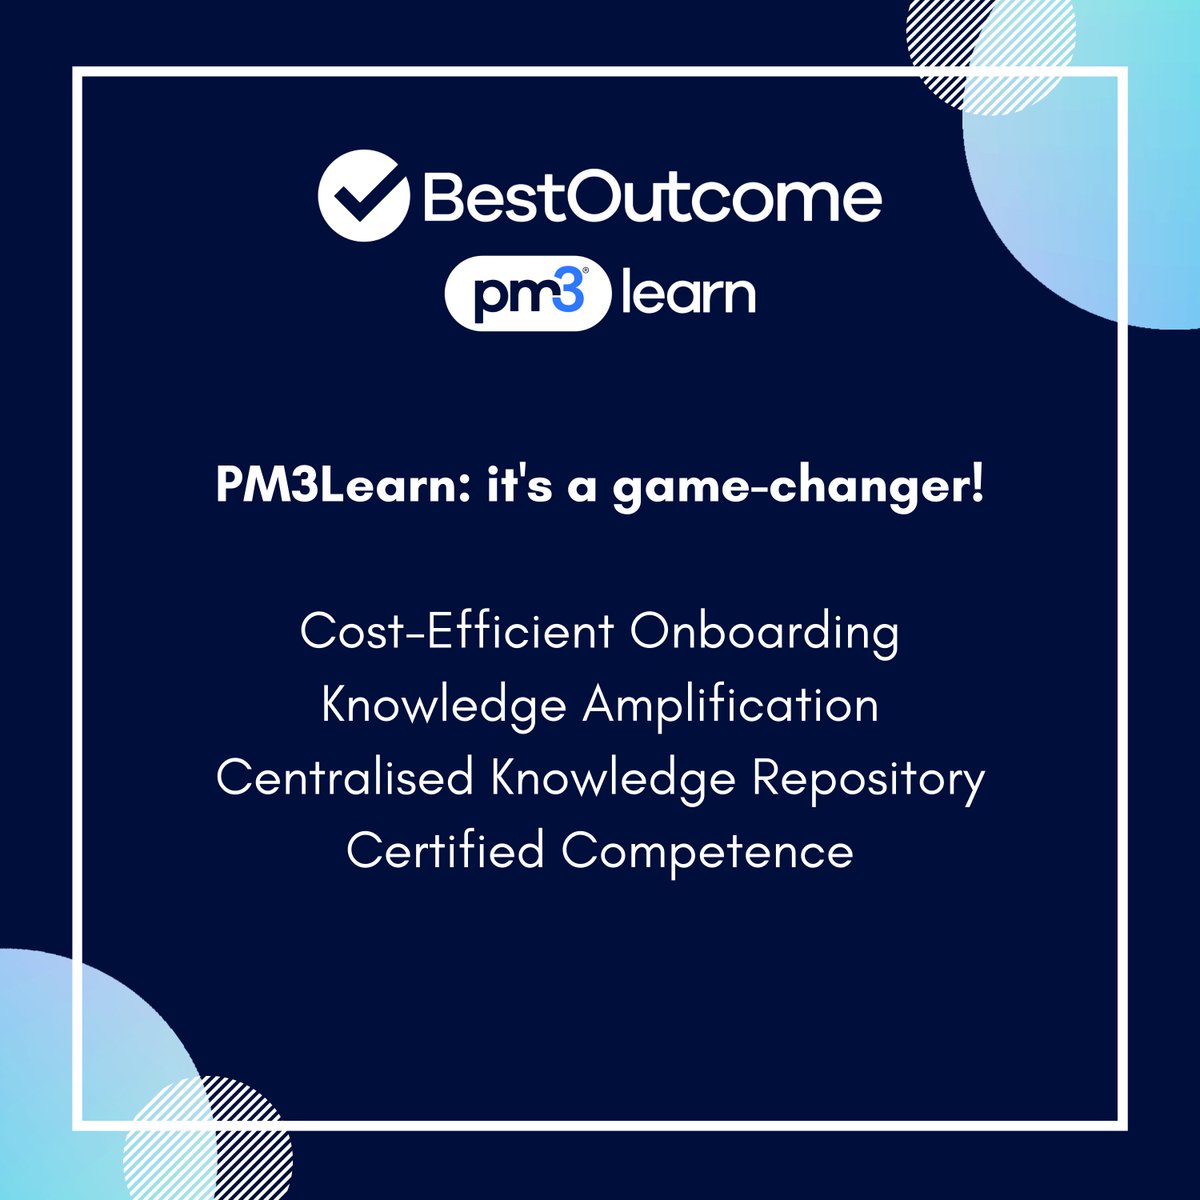 Effortless Project Delivery - It's Possible! PPM tools help, but training is key. 
PM3Learn empowers your team with on-demand learning for success. 🎉🤝
Find out more here - bestoutcome.com/contact/
#projectmanagement #projectdelivery #projectportfolio #reducedcosts #LMS